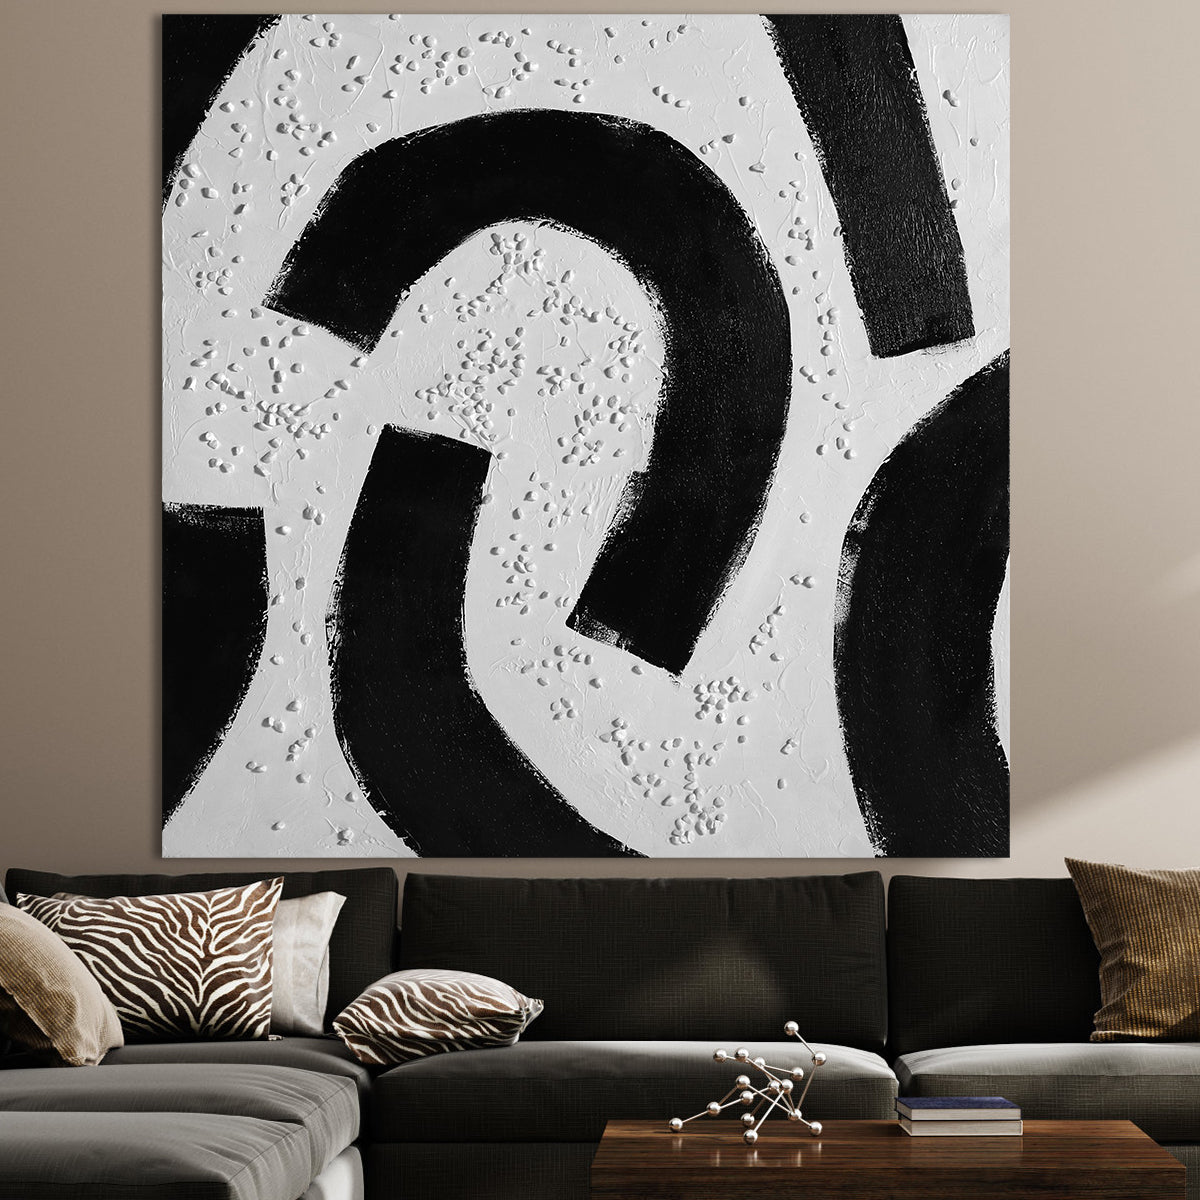 Black and White Circle Combination abstract textured #ypy207